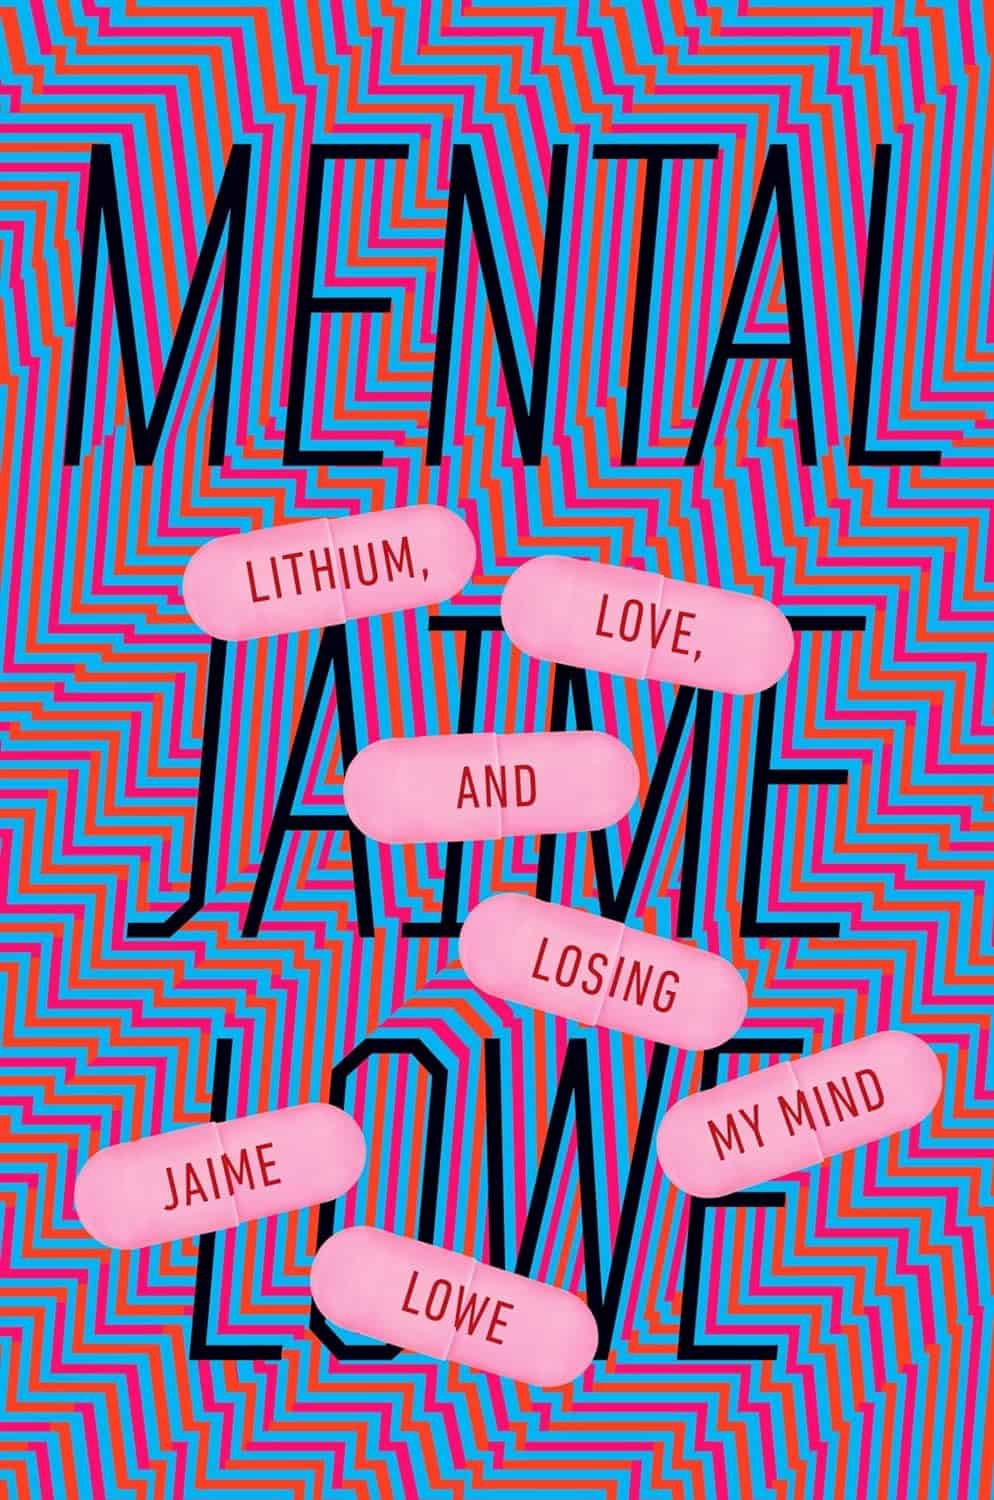 Mental Lithium, Love, and Losing My Mind